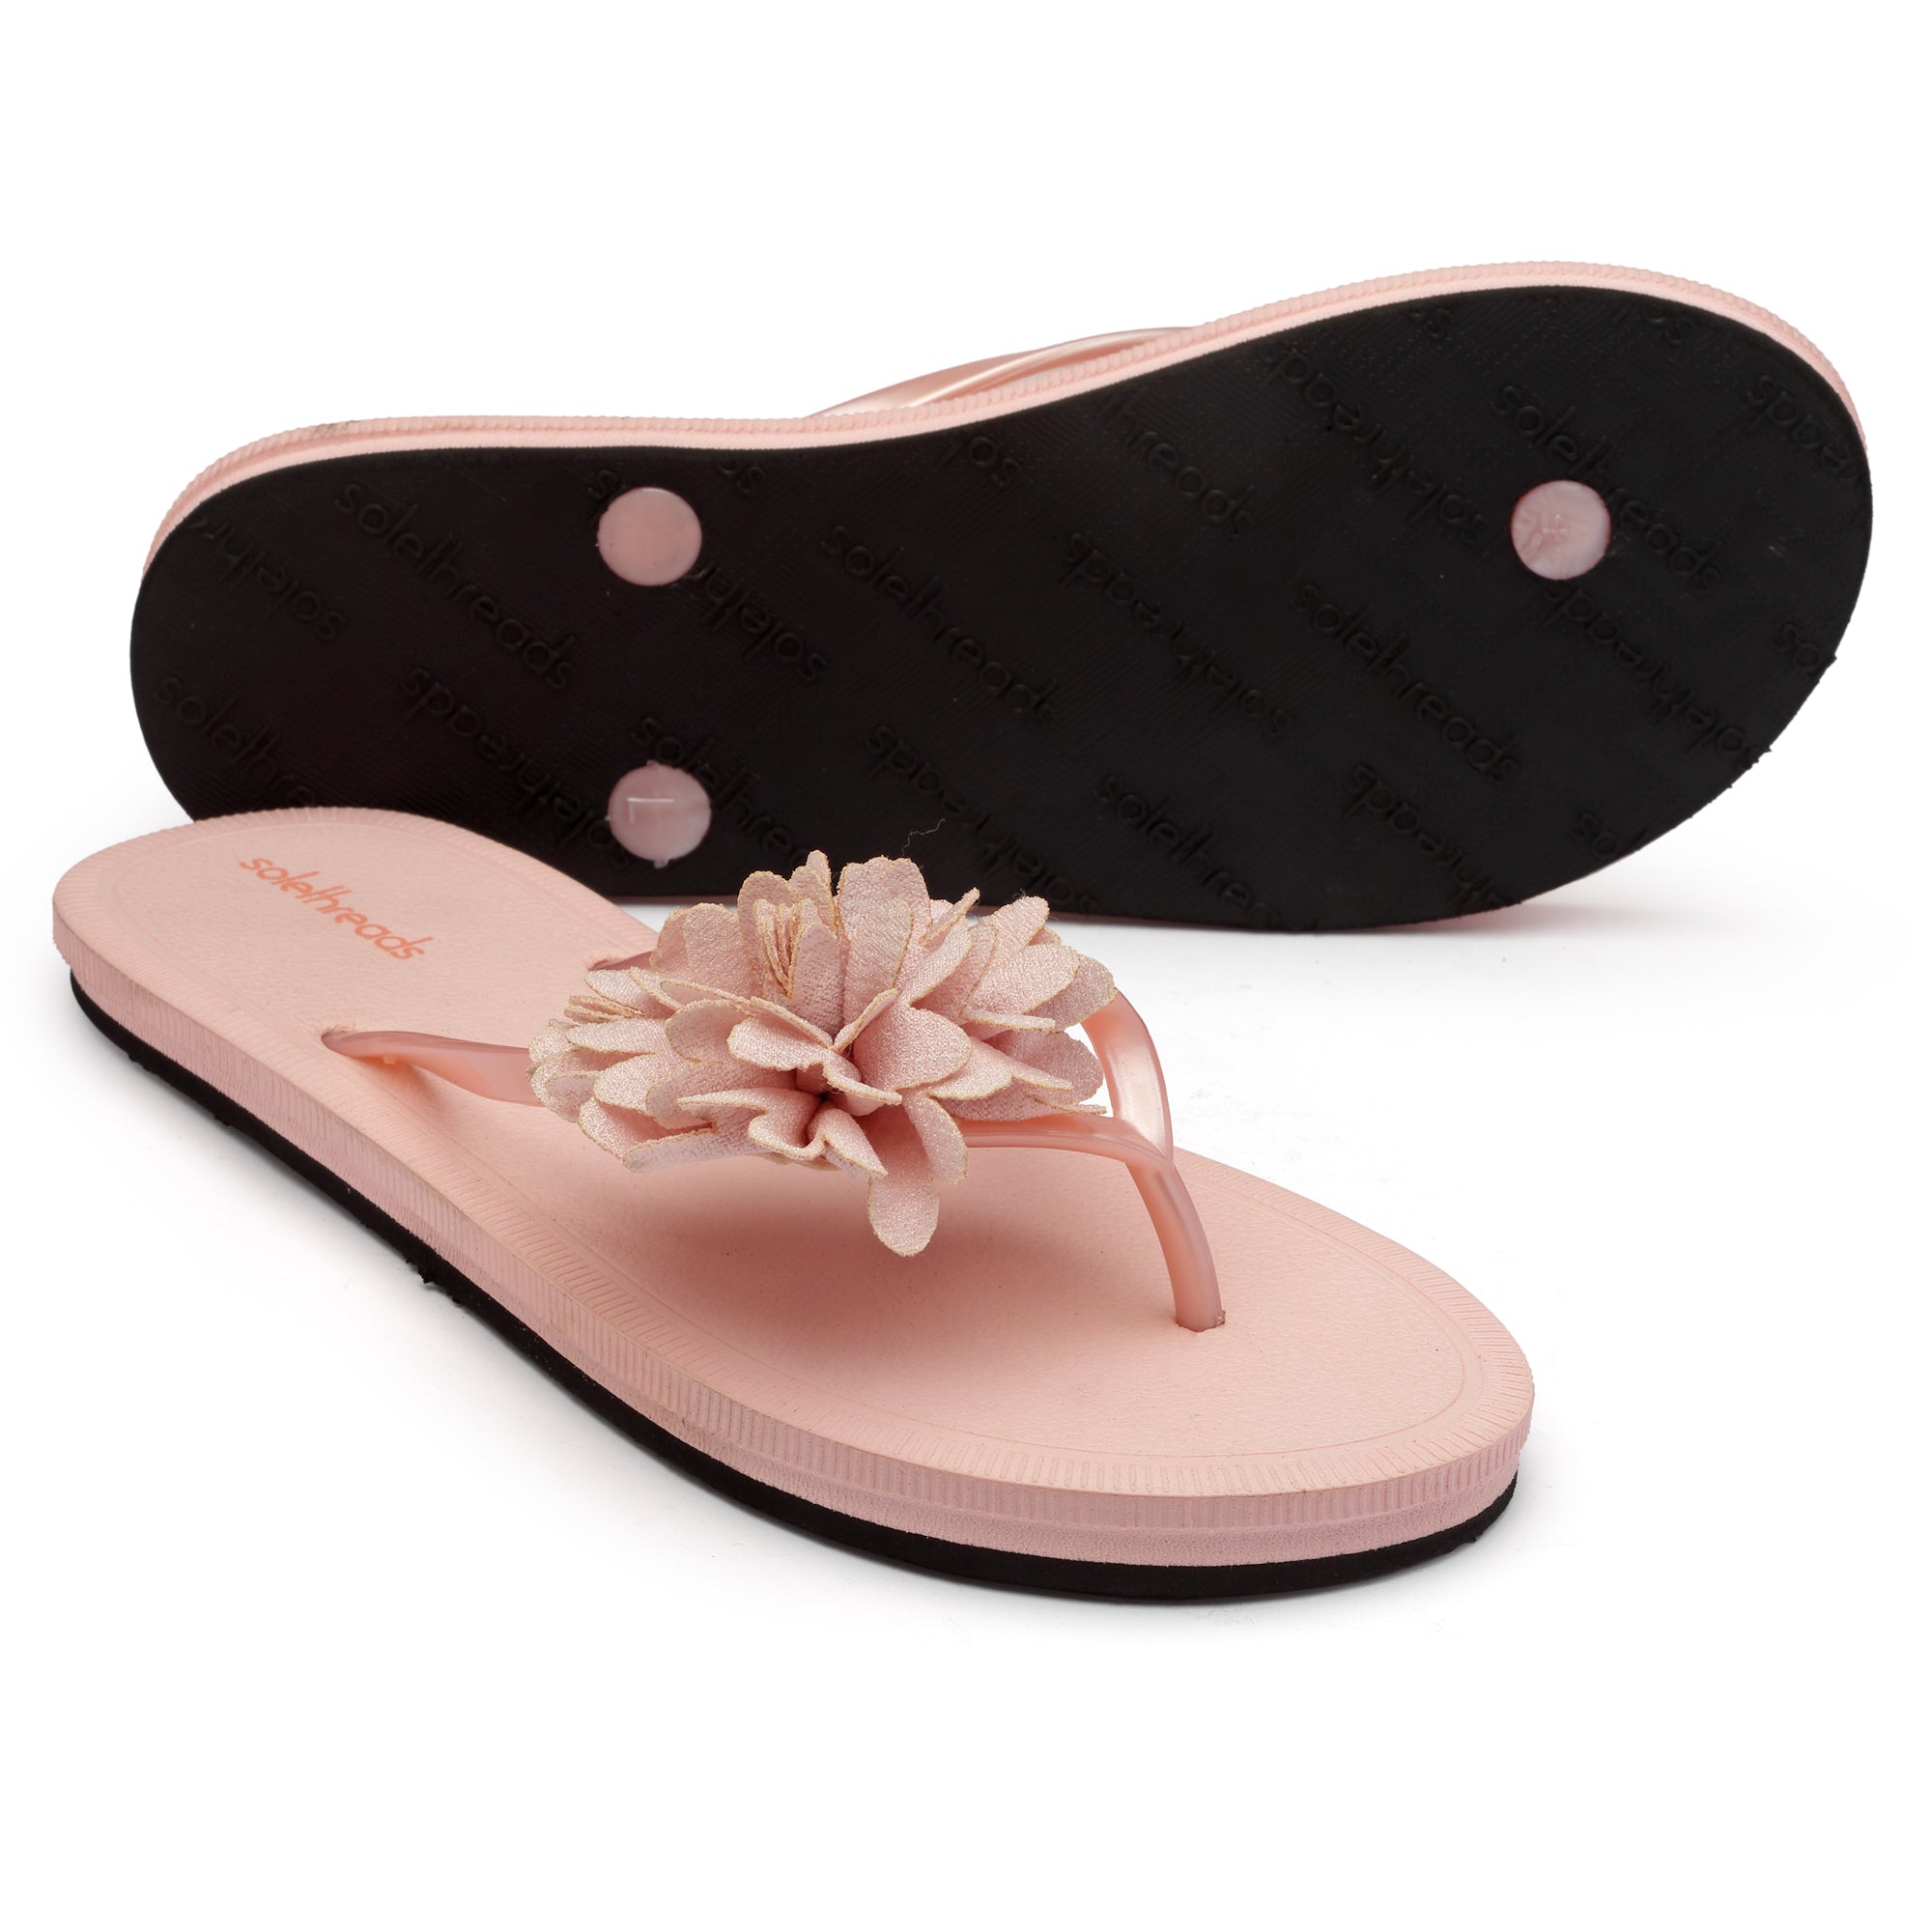 YOGA SANDAL  Super Comfortable Flats for Women made from Yoga Mat